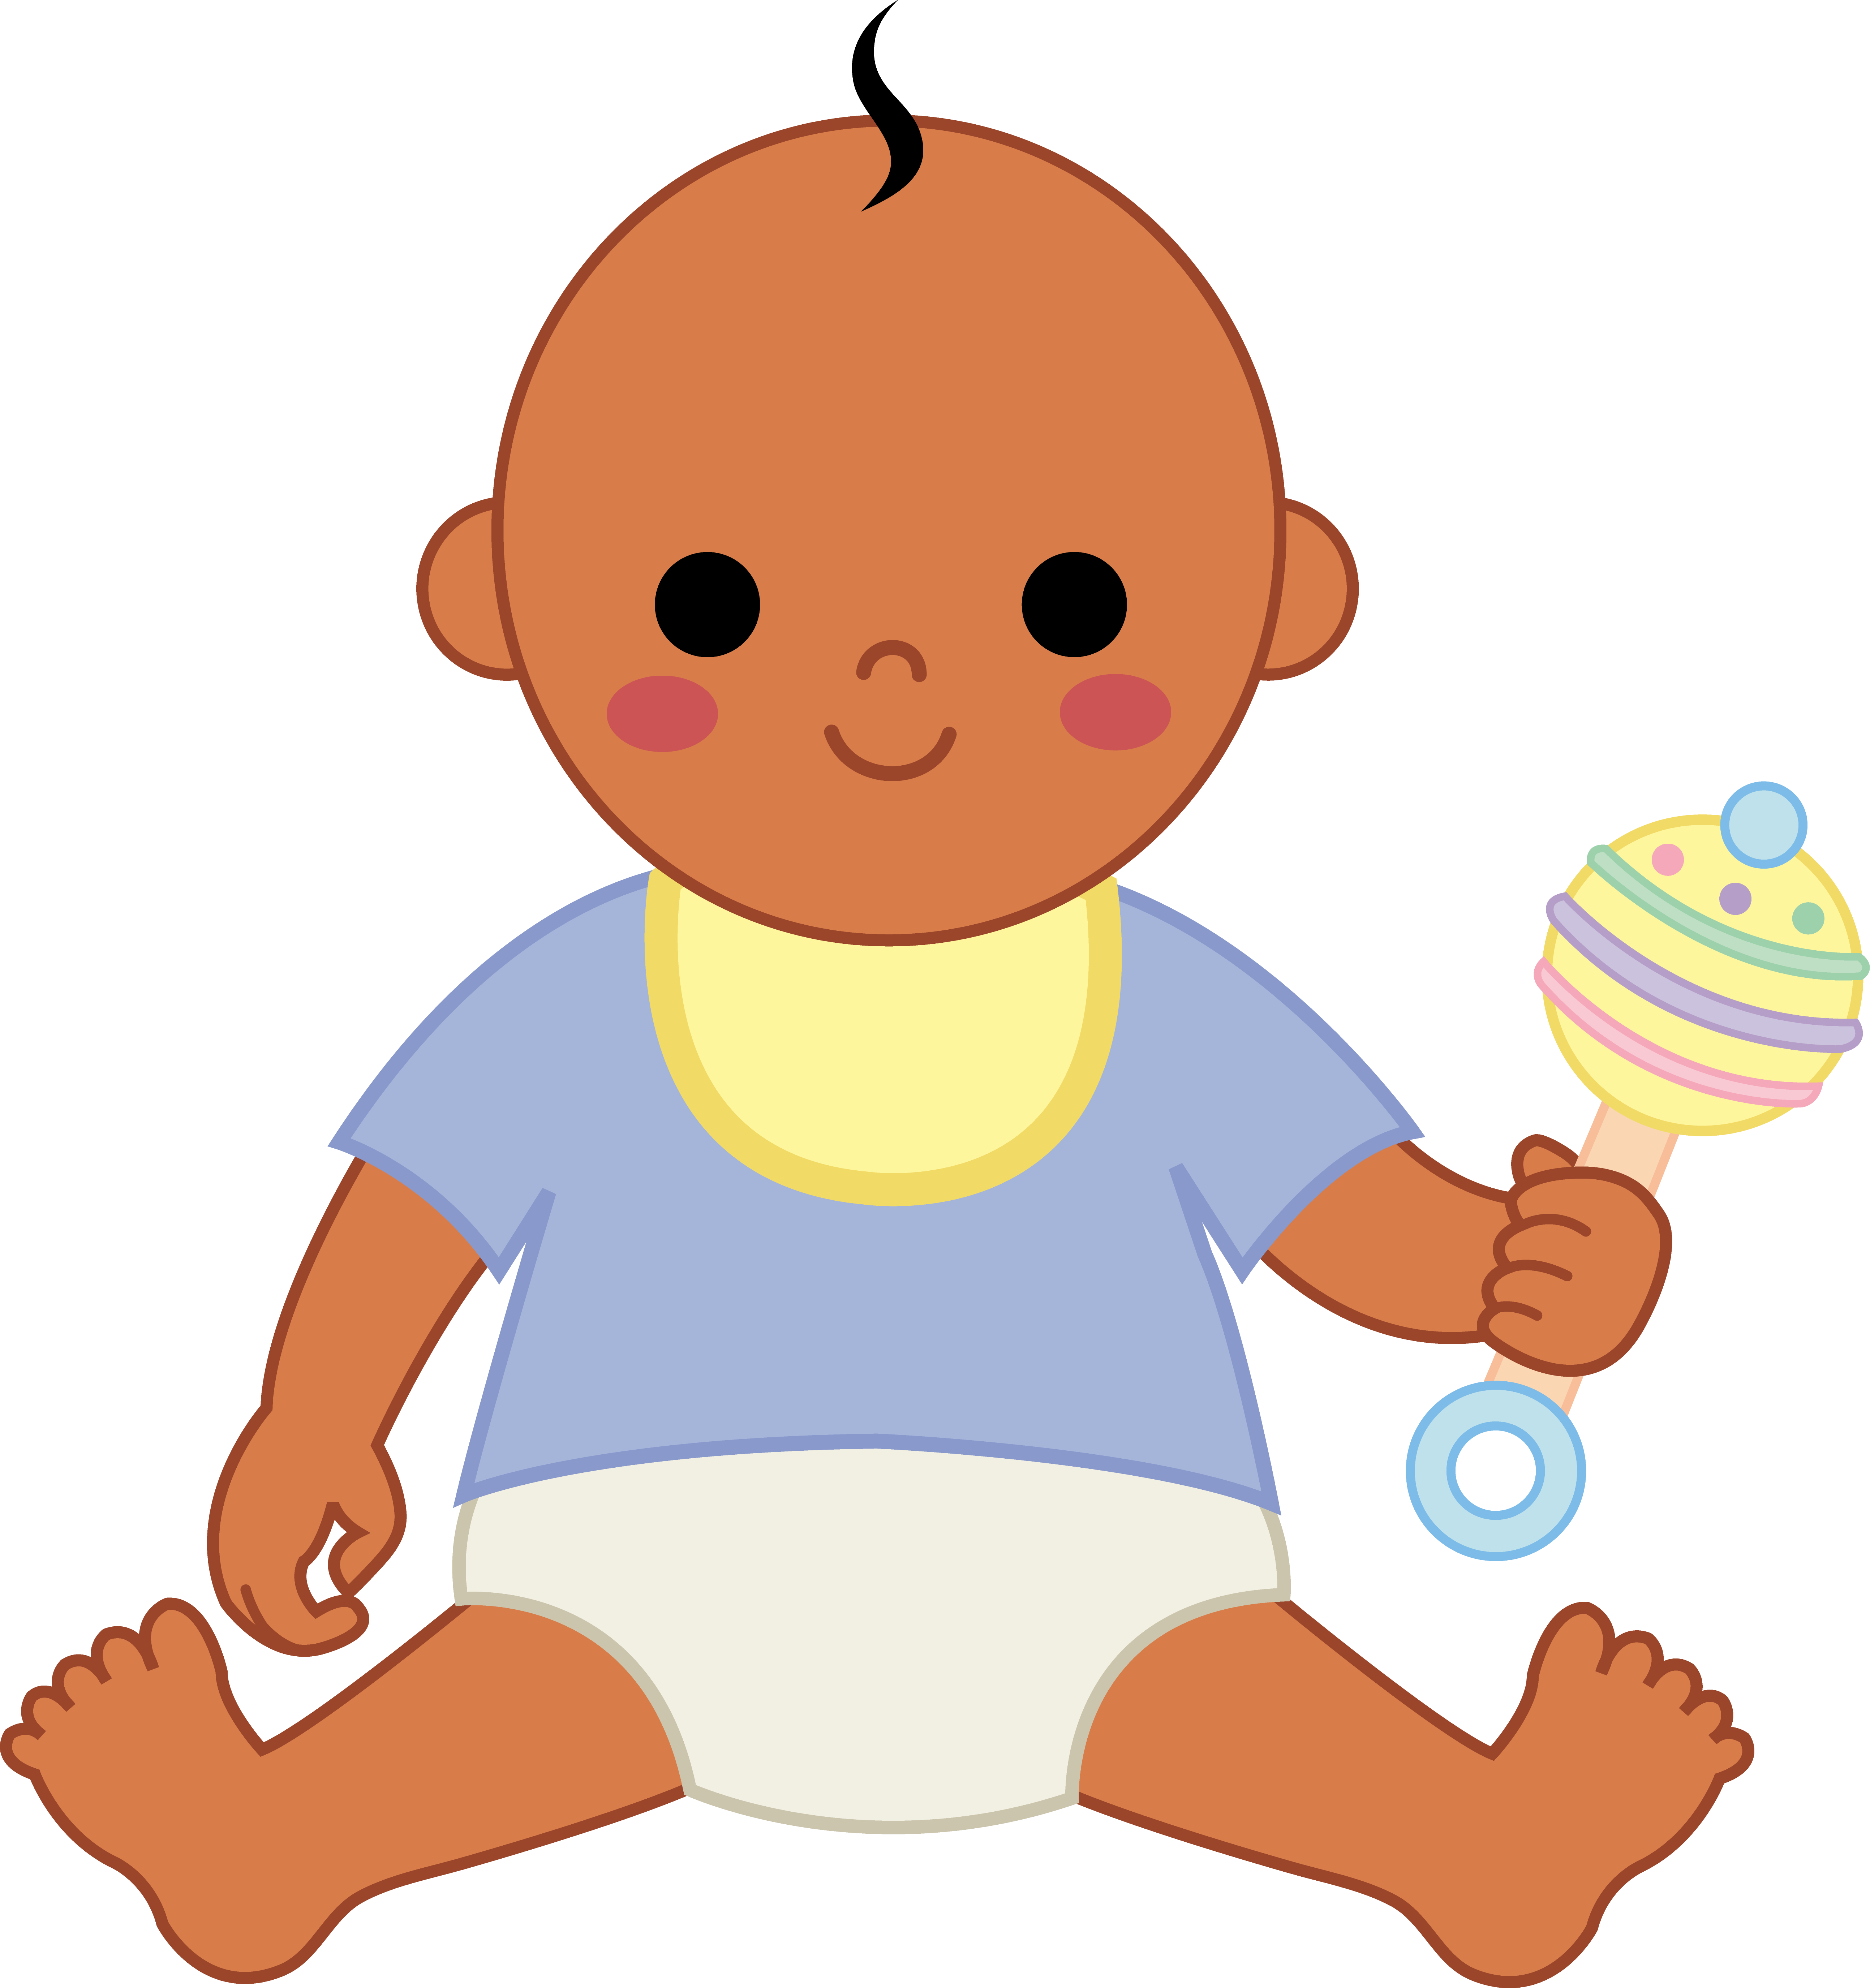 Cartoon Babies Pictures - Cliparts.co